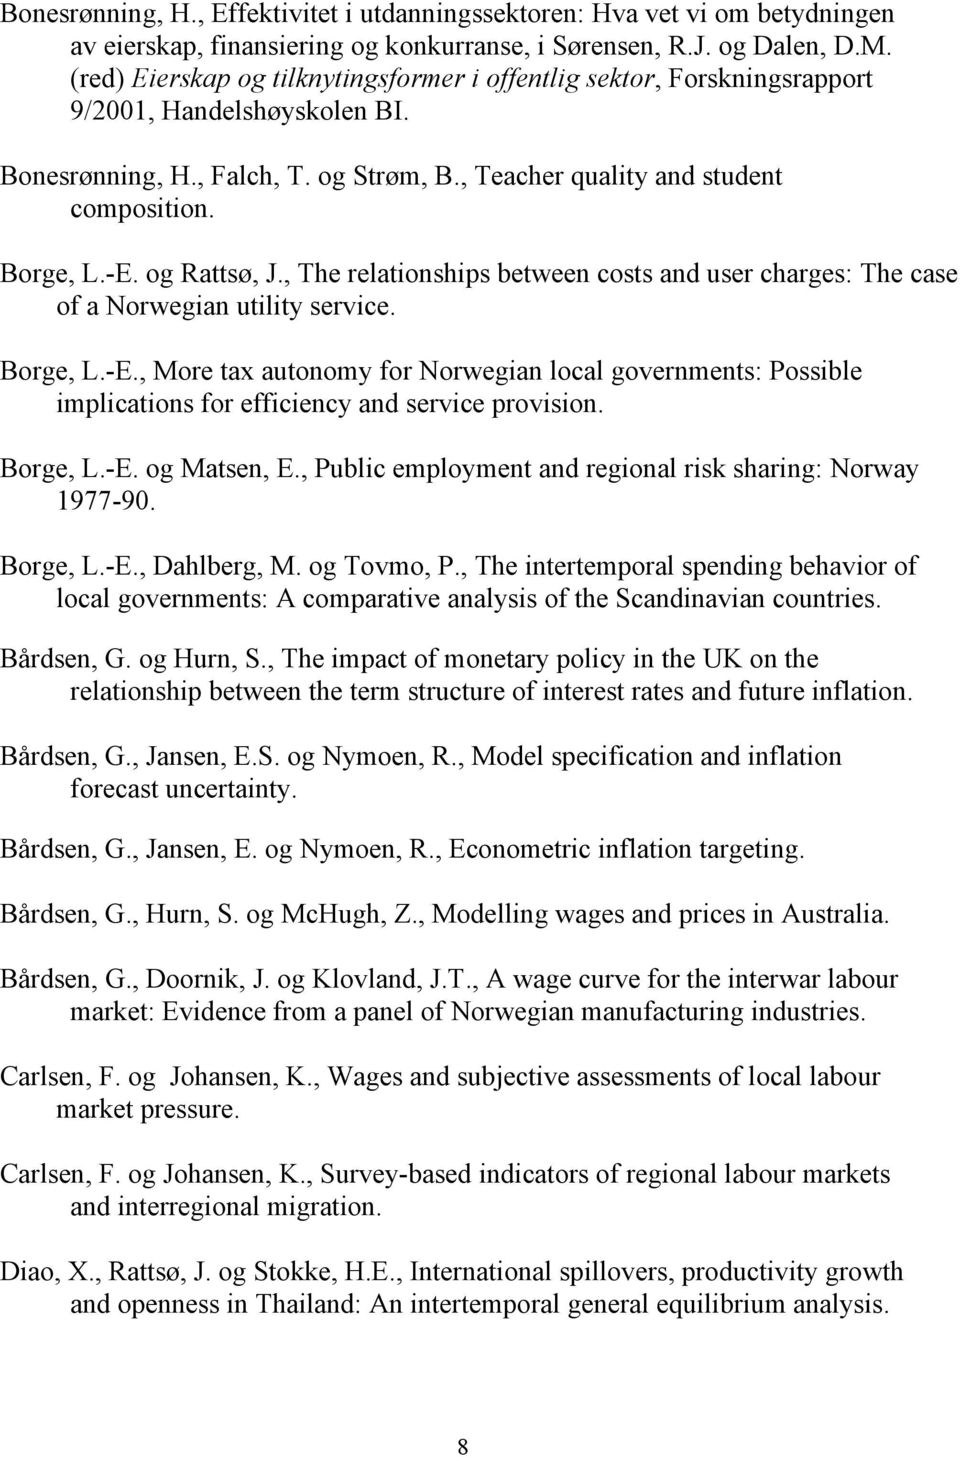 og Rattsø, J., The relationships between costs and user charges: The case of a Norwegian utility service. Borge, L.-E.